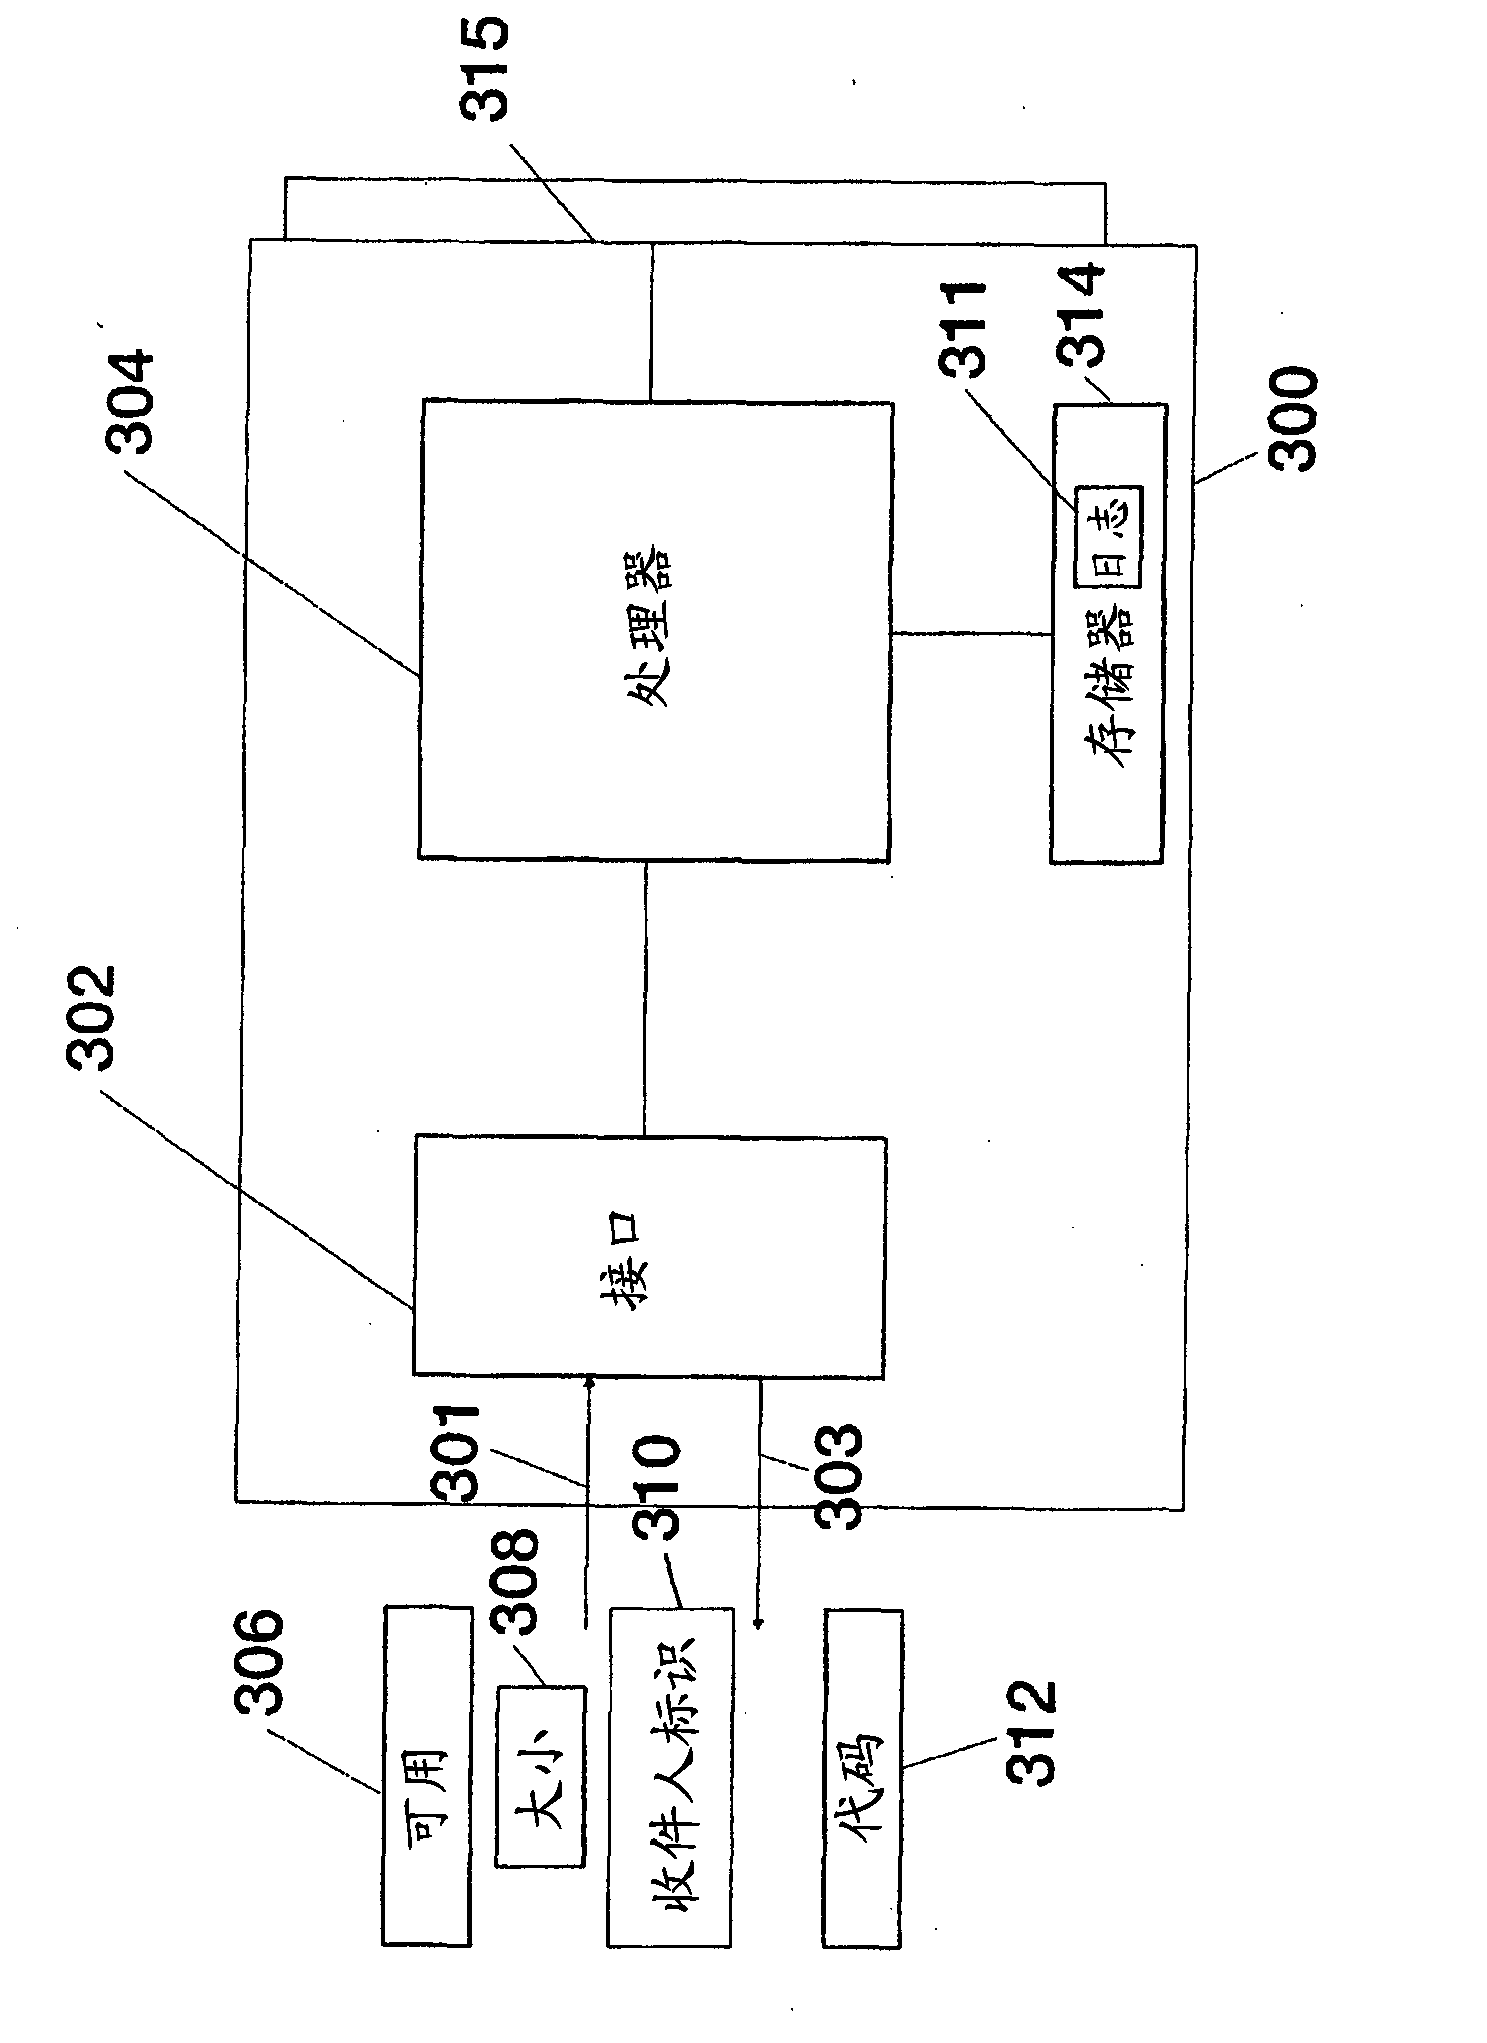 Systems and methods for accessing or managing secured storage space